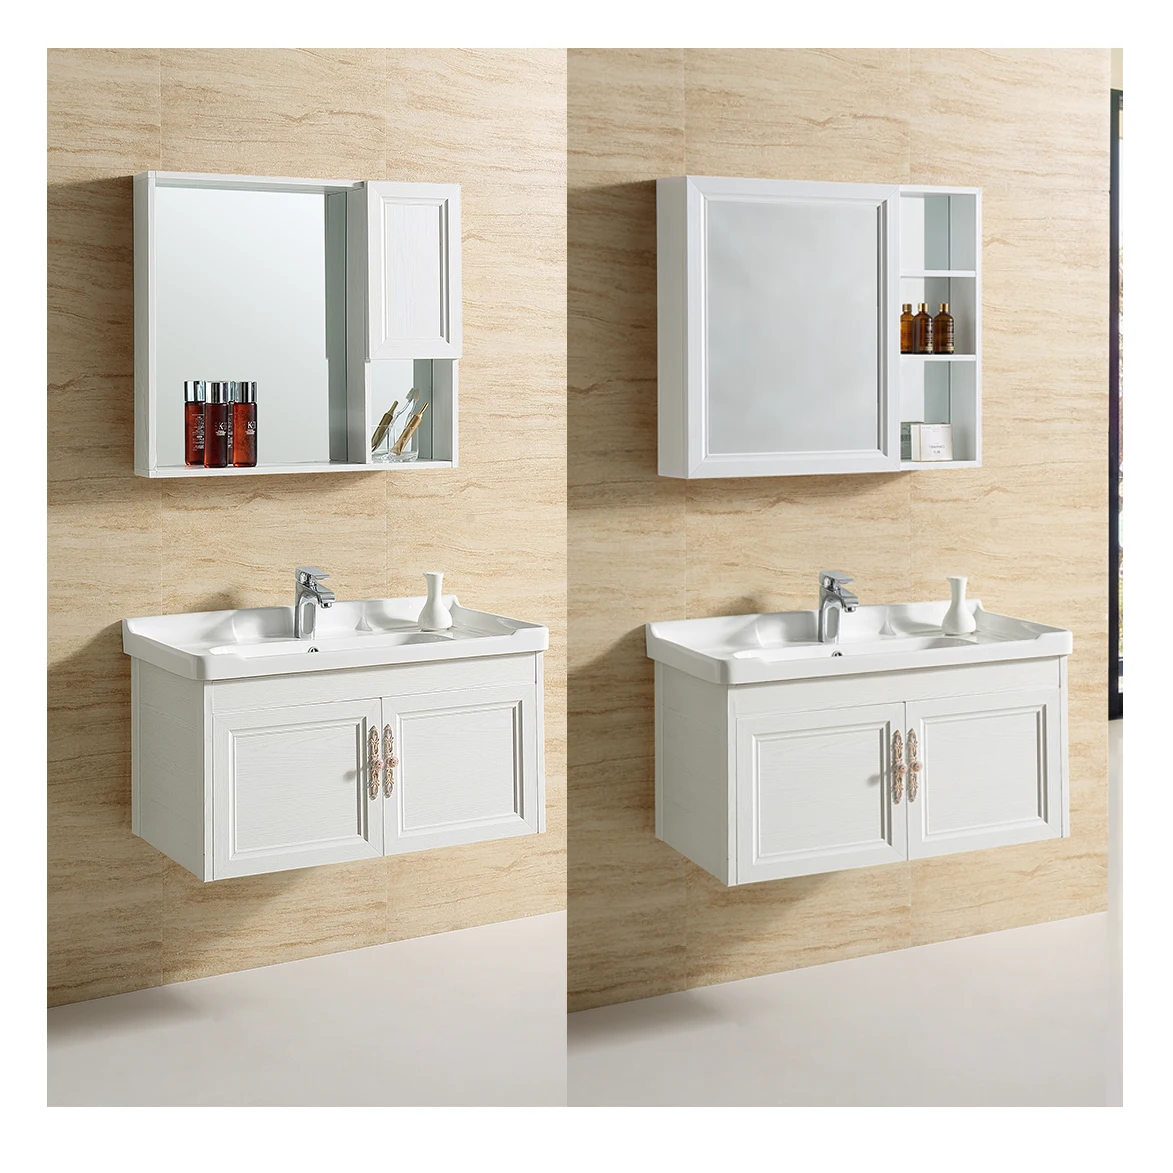 Chaozhou Factory Aluminum Bathroom Wash Basin Cabinet Set With Mirror Cheap Price Waterproof Wall Mounted Cabinet Vanity Set Buy Bathroom Mirror Cabinet